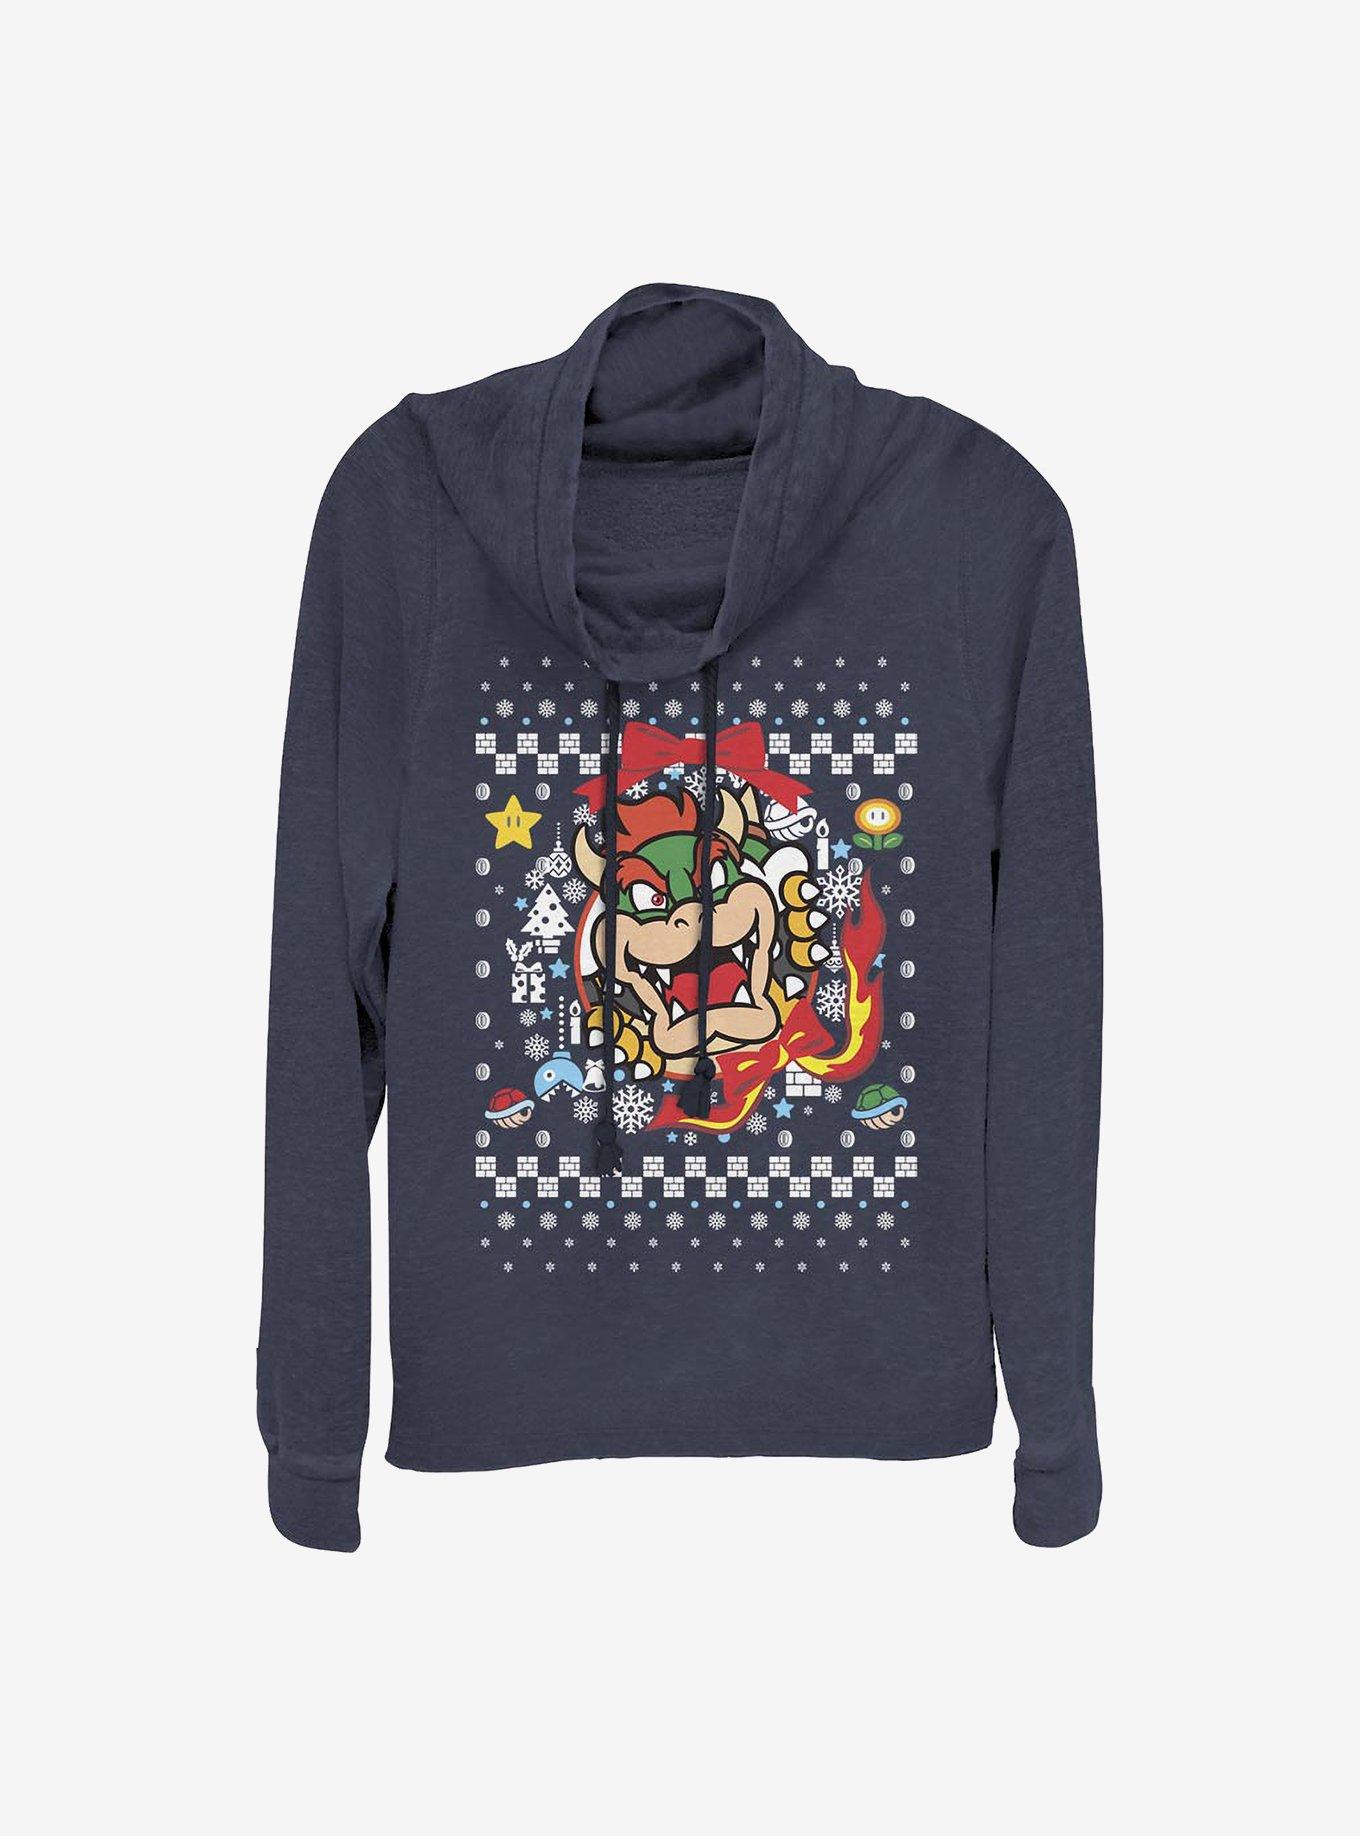 Super Mario Bowser Wreath Ugly Christmas Sweater Cowl Neck Long-Sleeve Girls Top, NAVY, hi-res